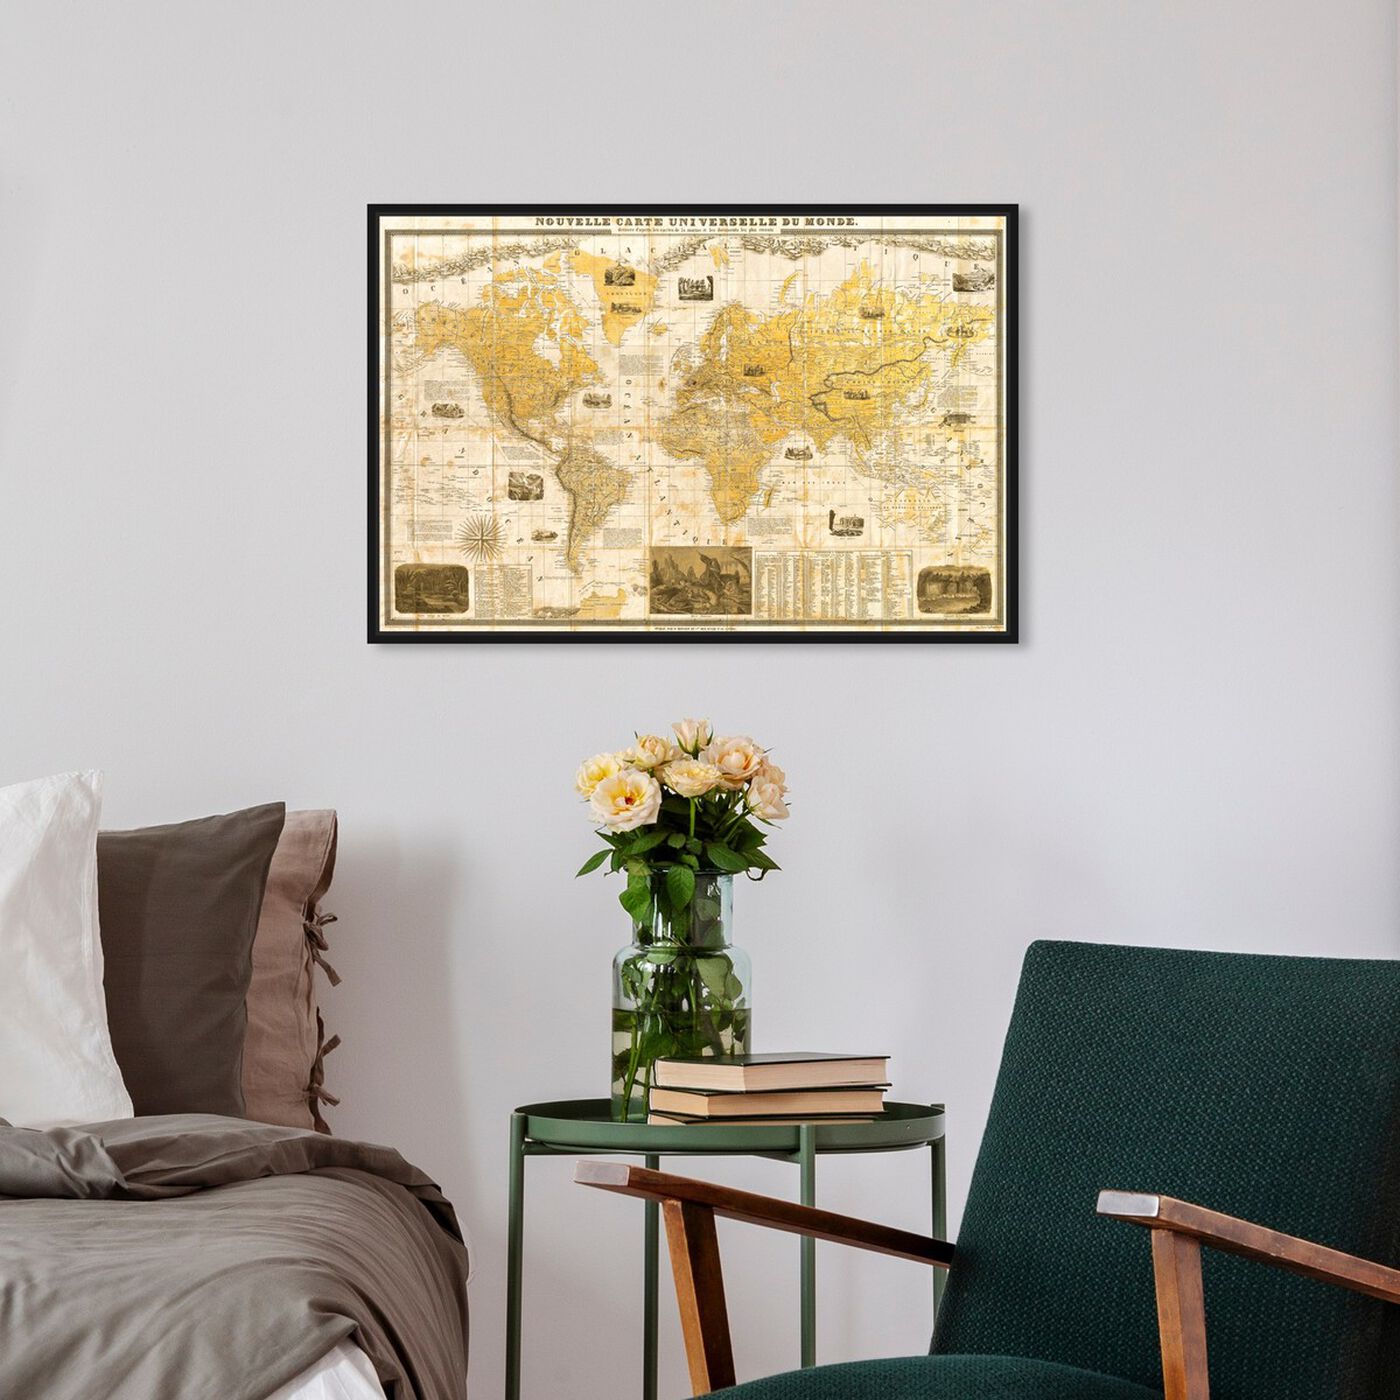 Hanging view of SAI - Nouvelle Carte Universelle Du Monde featuring maps and flags and world maps art.